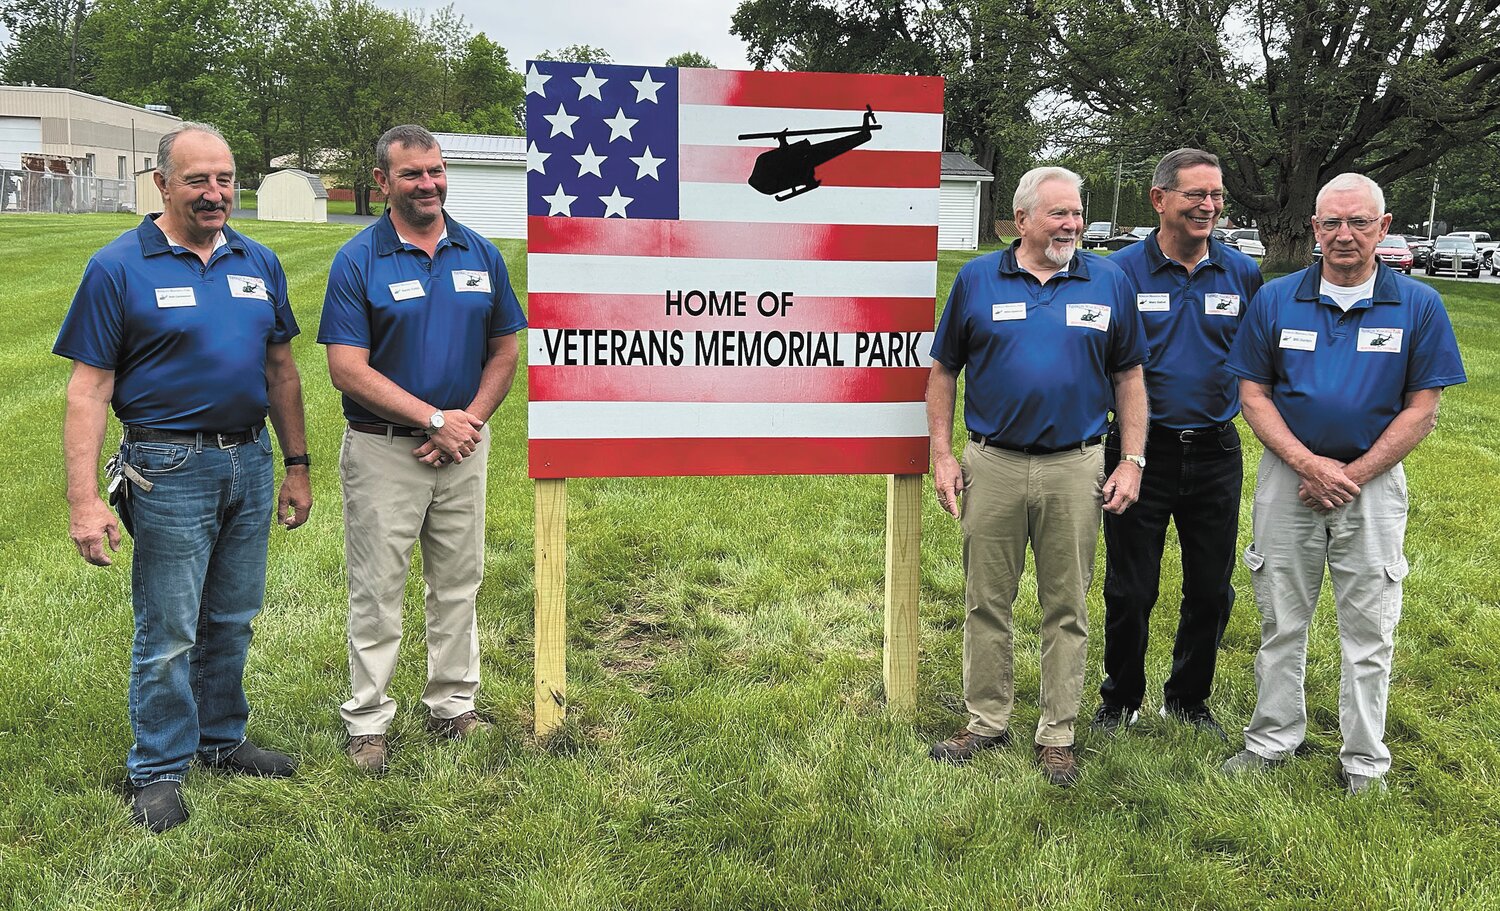 Five of the six Veterans Memorial Park board members gather Monday for a photo announcing the creation of the new park.